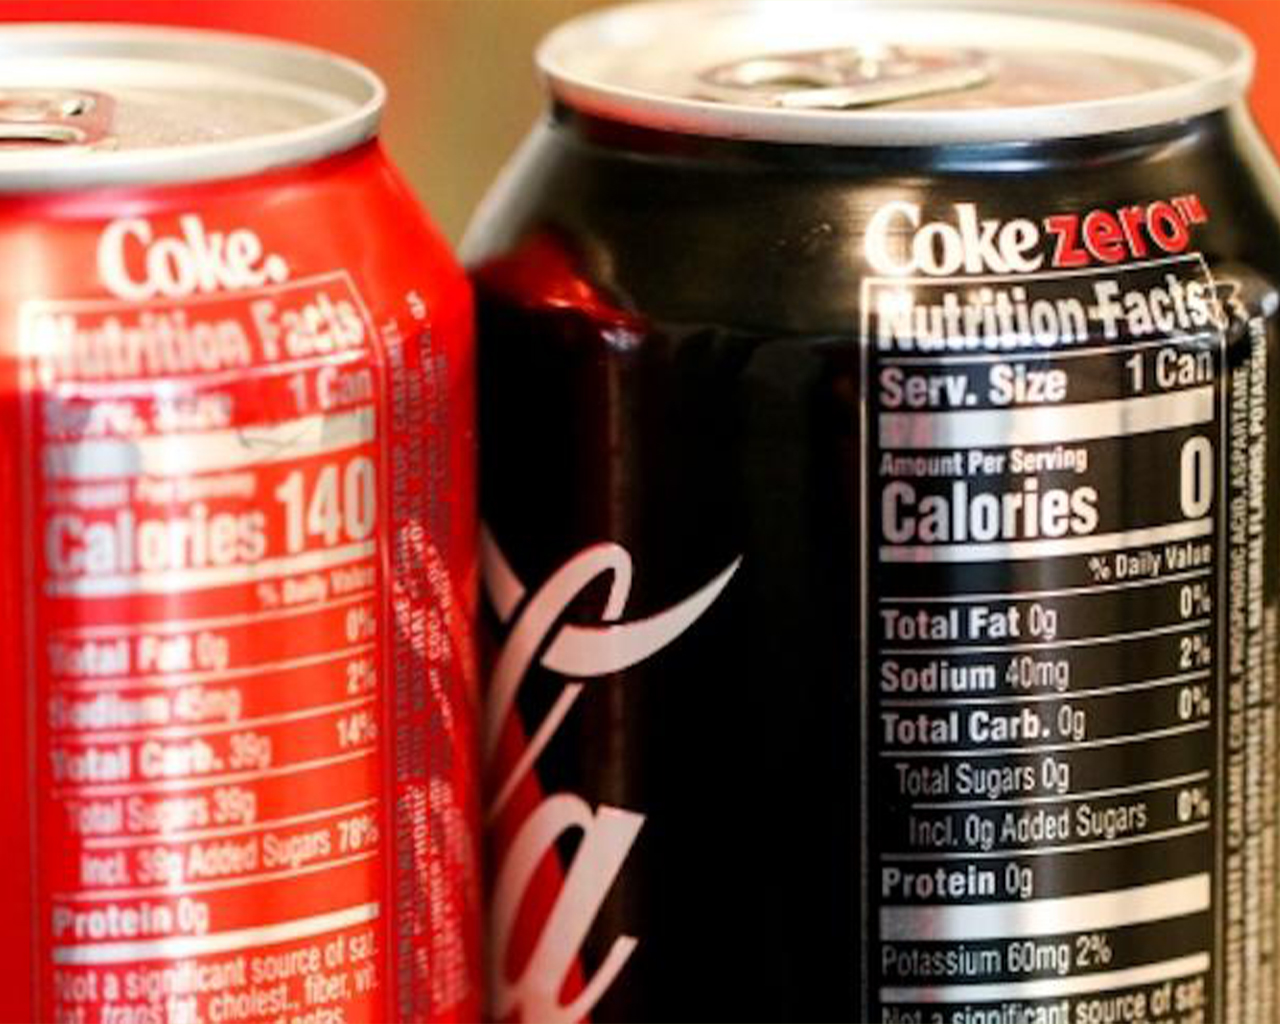 Shot of the nutritional values table on the back of a Coke Zero and Coke Classic can